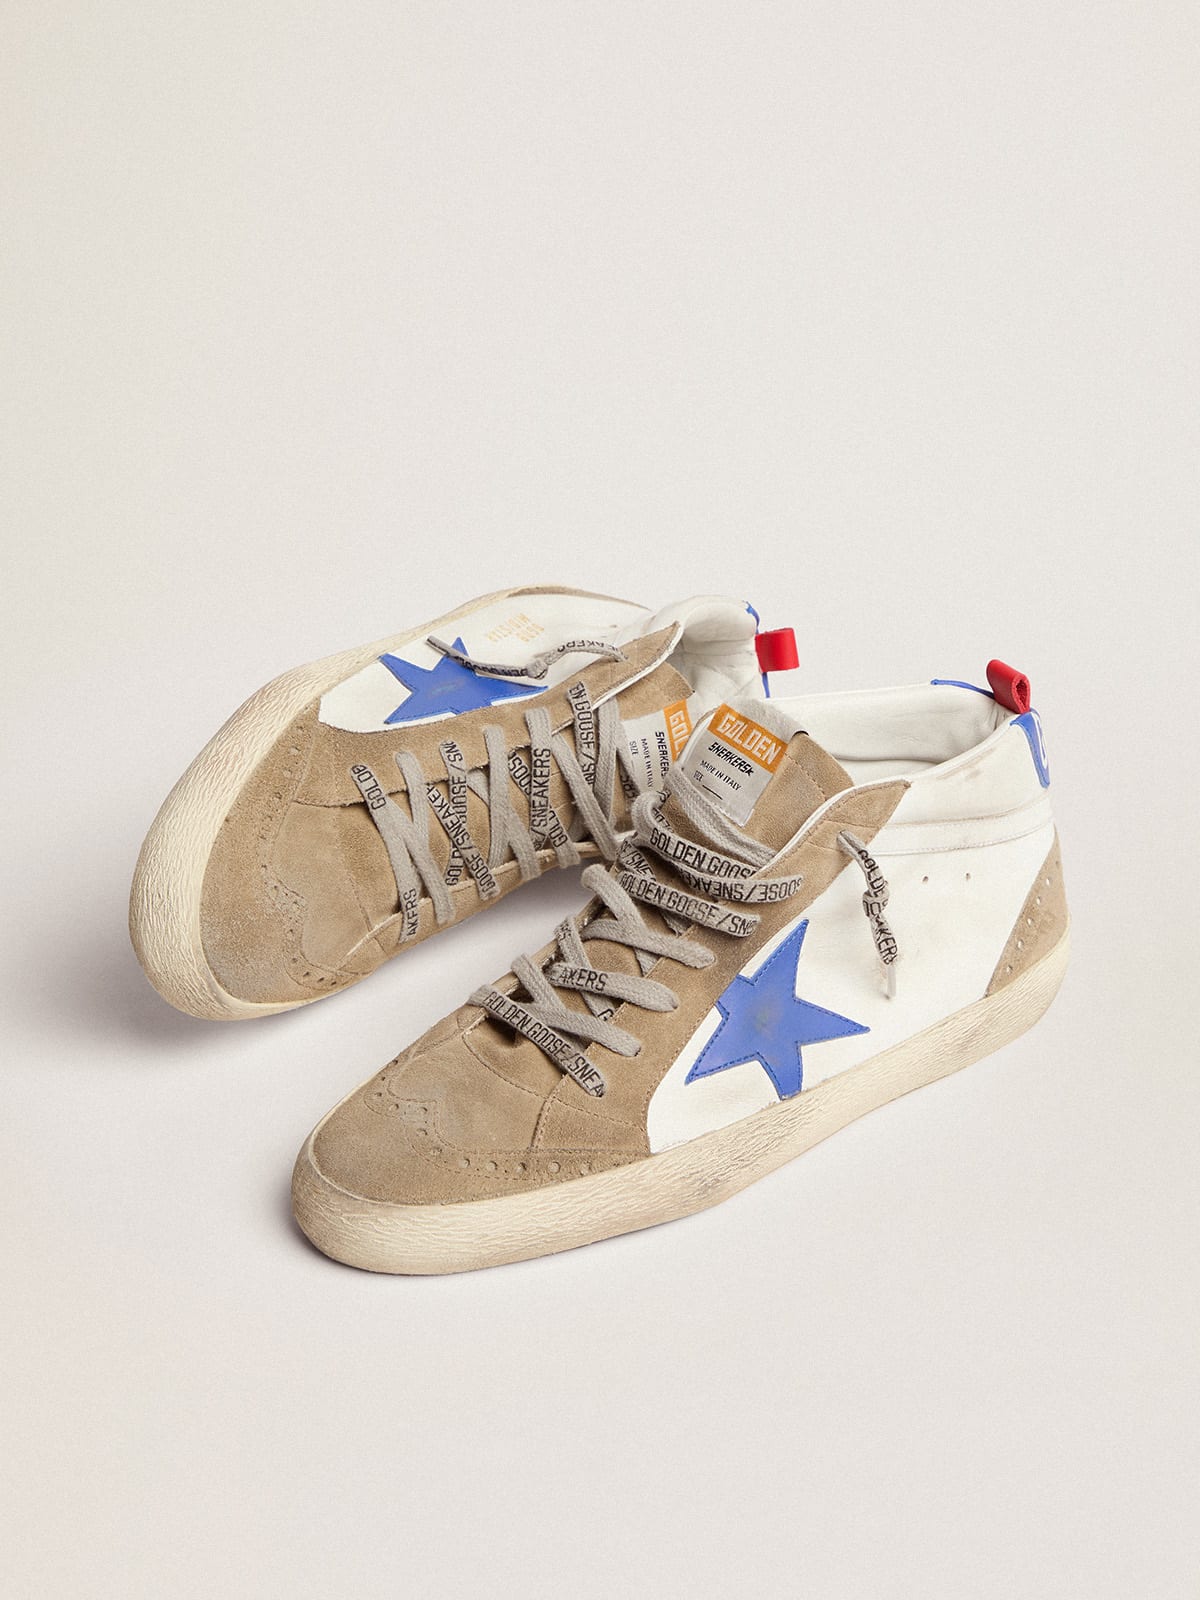 Golden Goose - Mid Star sneakers in white leather with blue star and dove-gray inserts in 